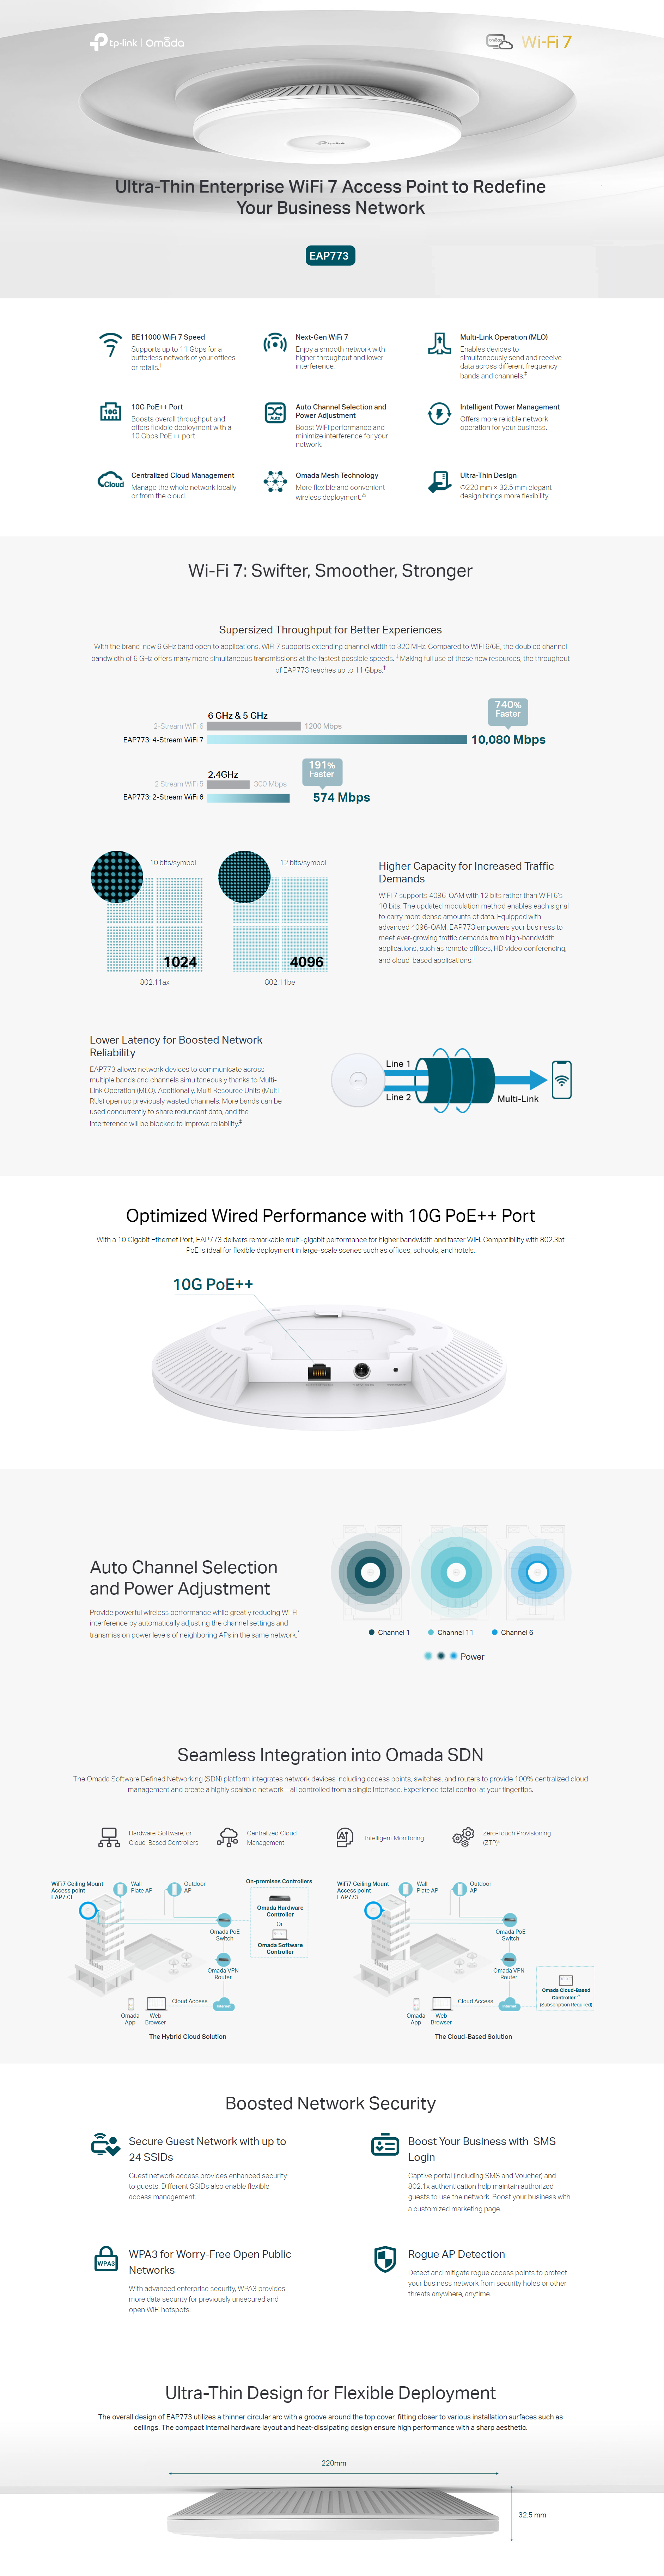 A large marketing image providing additional information about the product TP-Link Omada EAP773 - BE9300 Ceiling-Mount Tri-Band Wi-Fi 7 Access Point - Additional alt info not provided